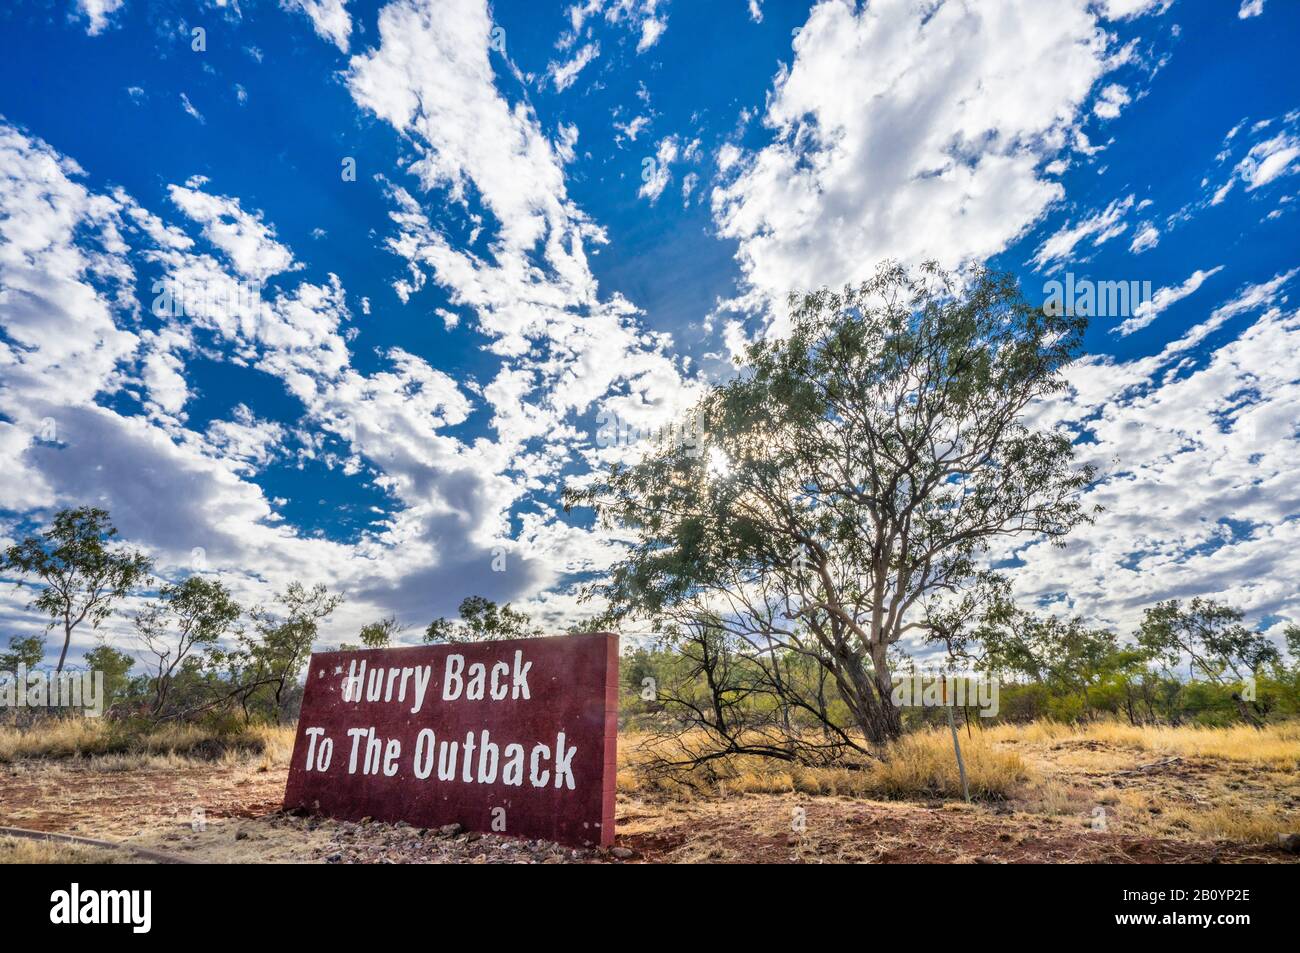 'Hurry Back To The Outback', sign at the city limits of Cloncurry by the side of the Flinders Hwy, Concurry, north-west Qoeensland, Australia Stock Photo